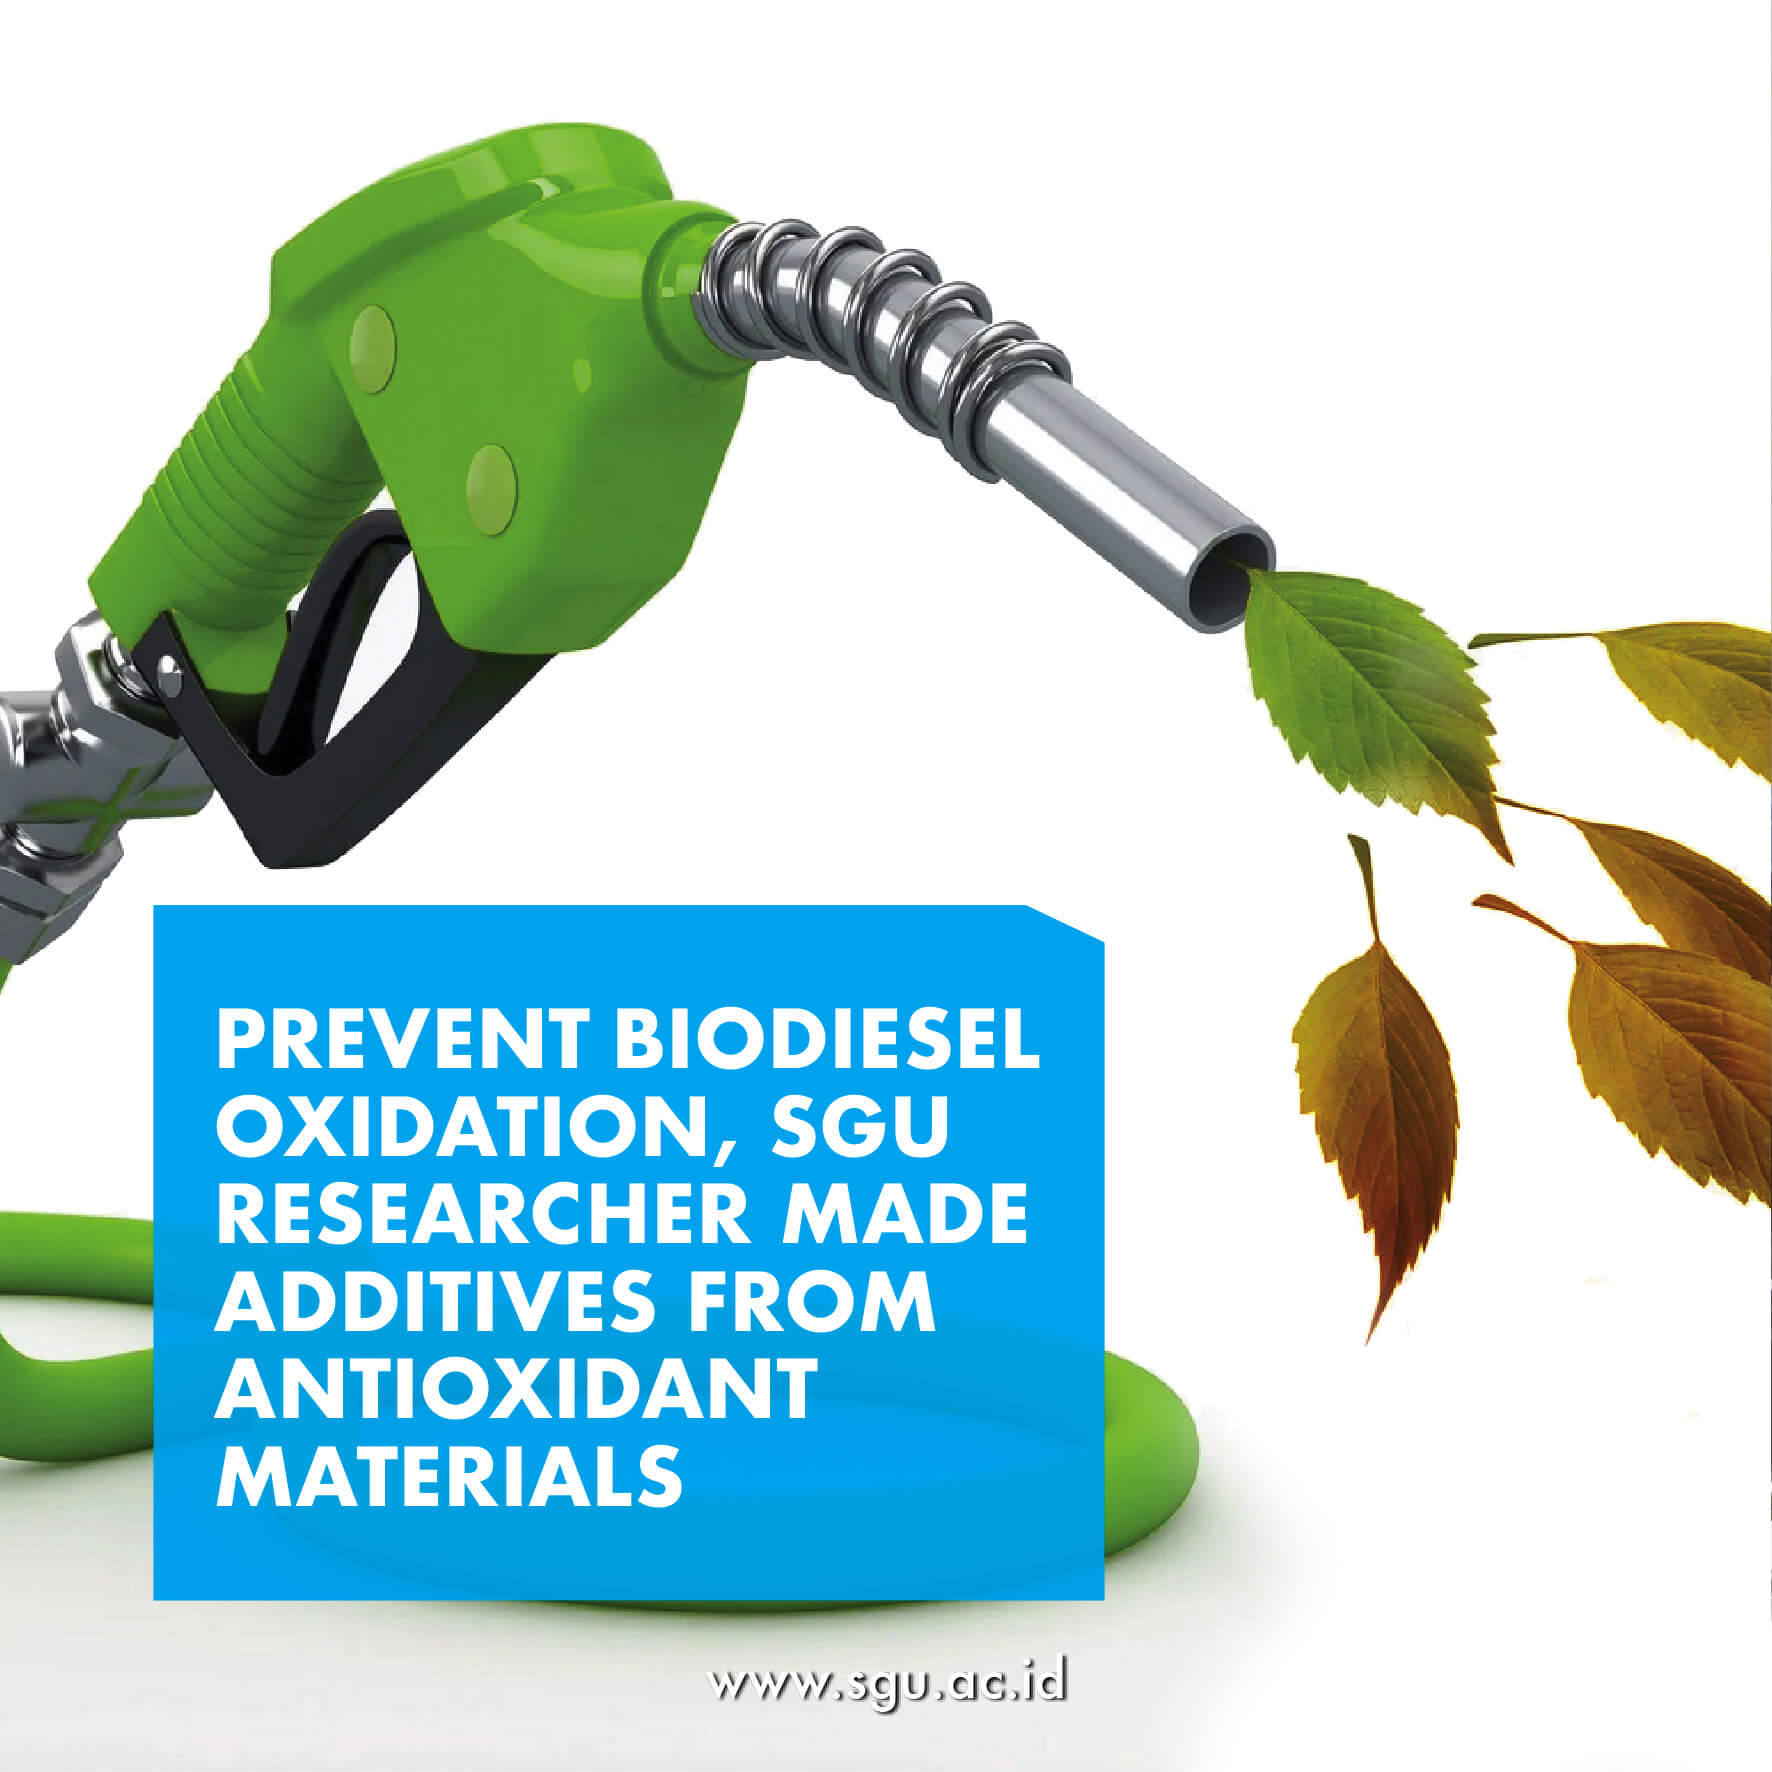 Prevent Biodiesel Oxidation, SGU Researcher Made Additives from Antioxidant Materials